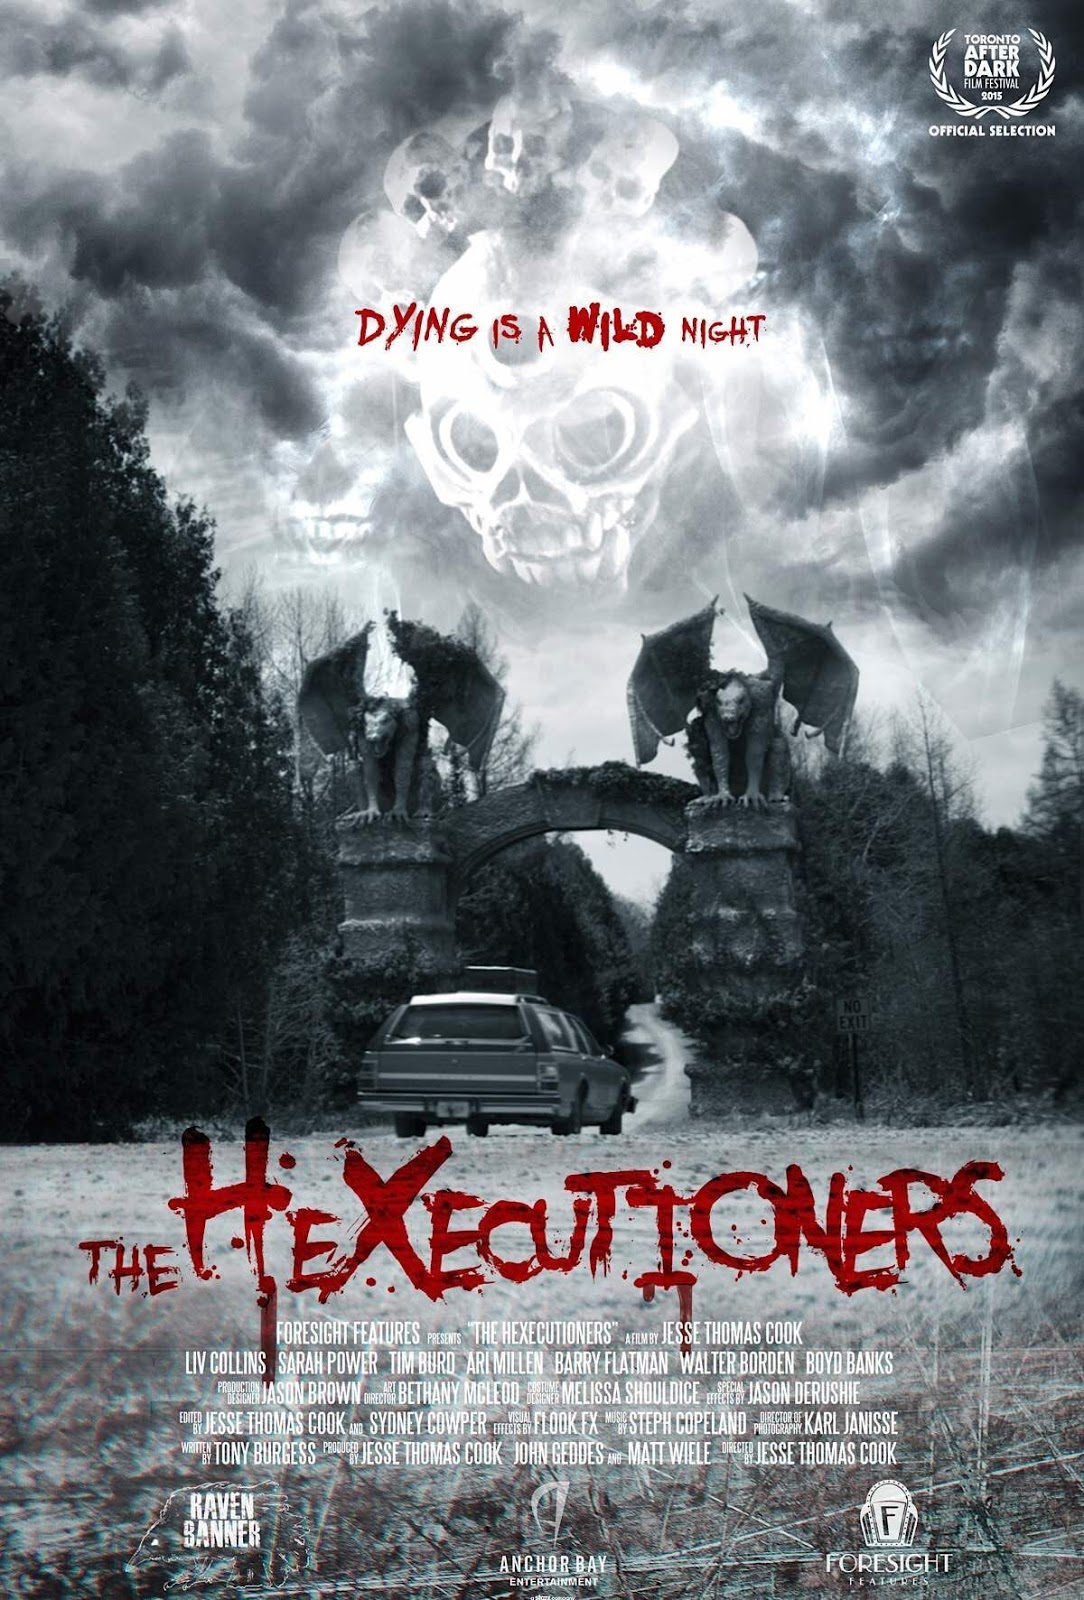 The Hexecutioners 2016